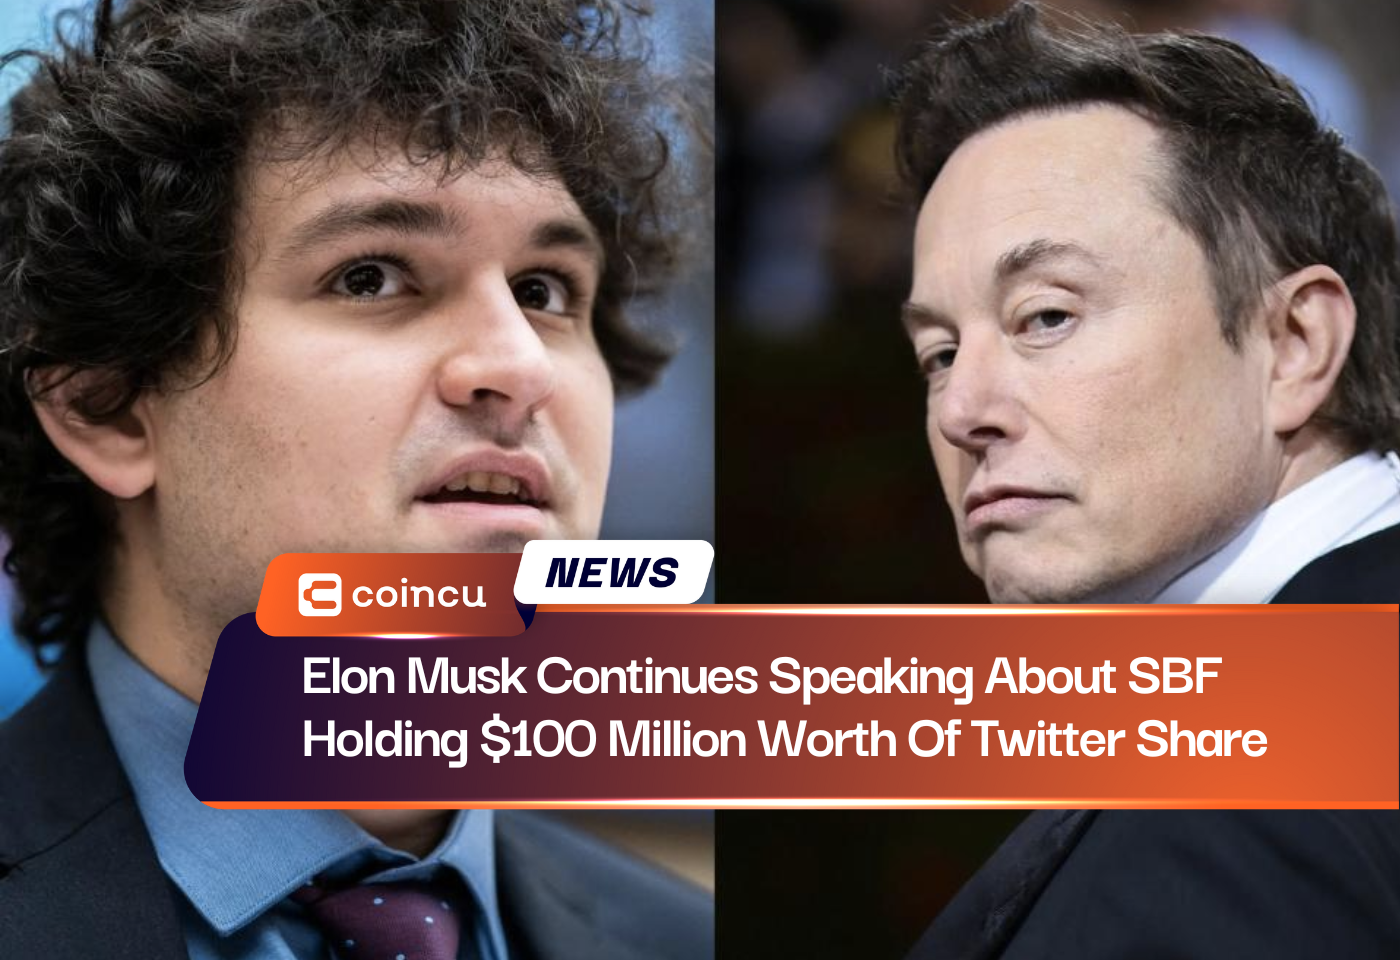 Elon Musk Continues Speaking About SBF Holding $100 Million Worth Of Twitter Share